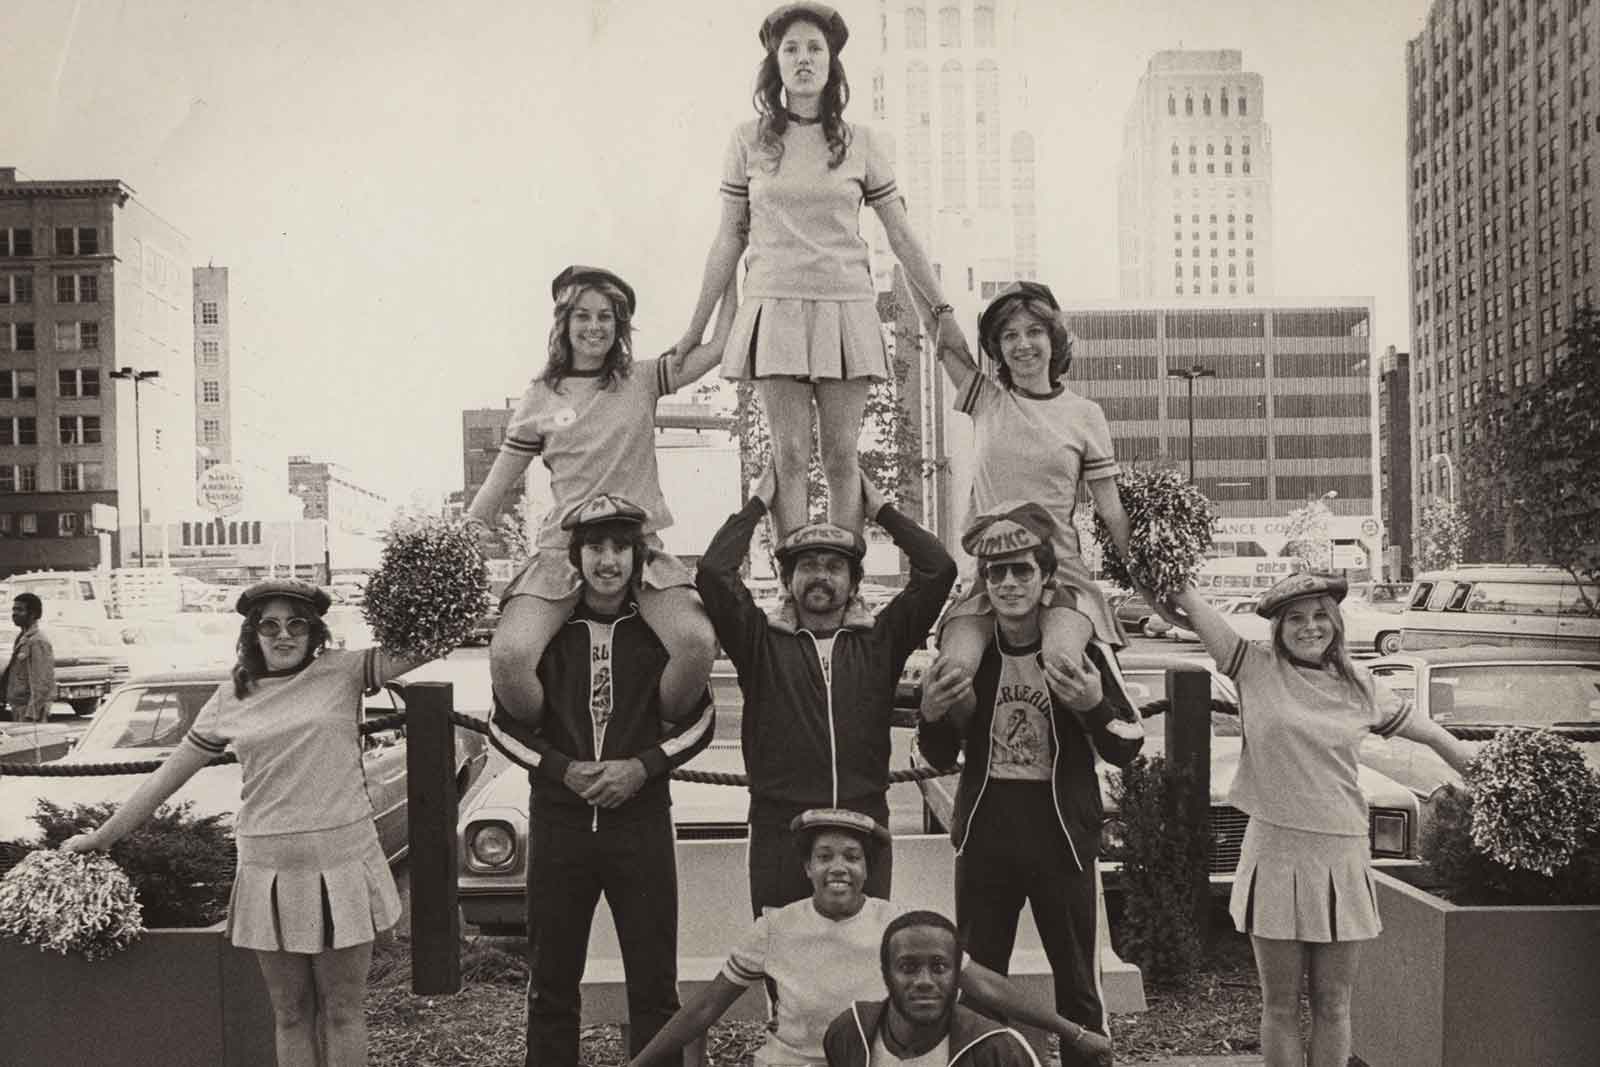 UMKC cheerleaders in black and white picture stand in a pyramid